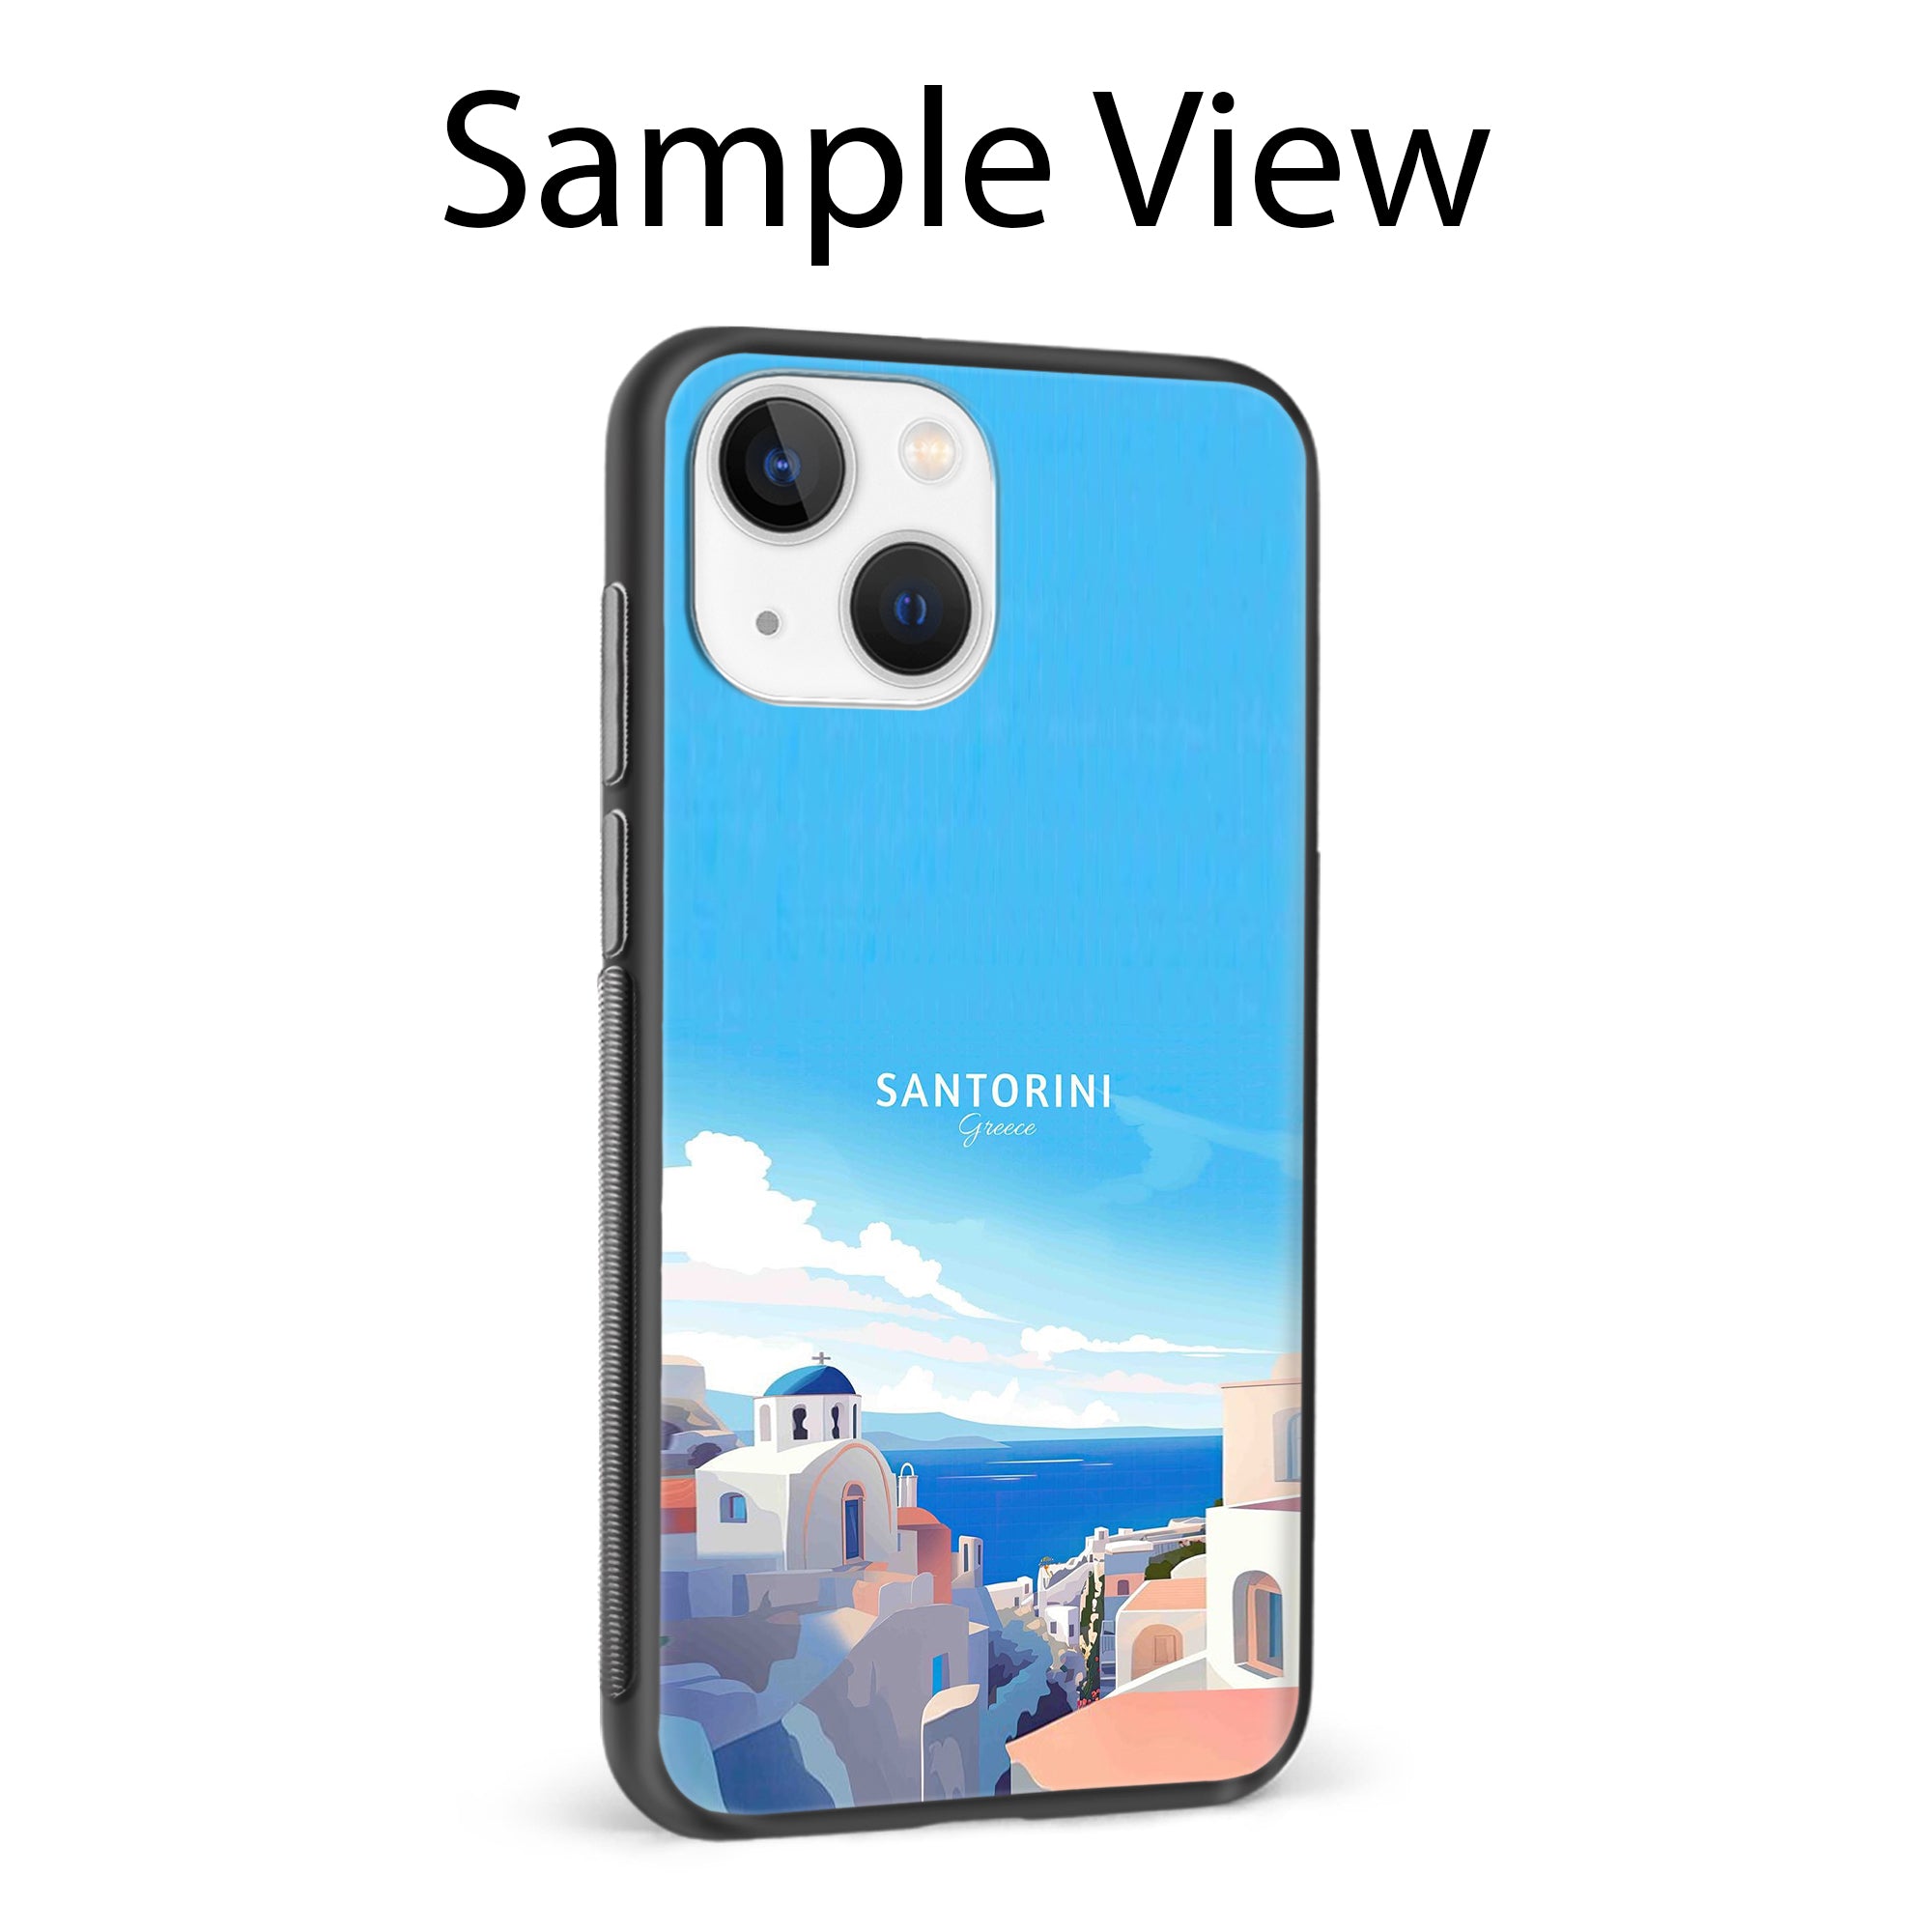 Buy Santorini Glass/Metal Back Mobile Phone Case/Cover For iPhone 11 Pro Online